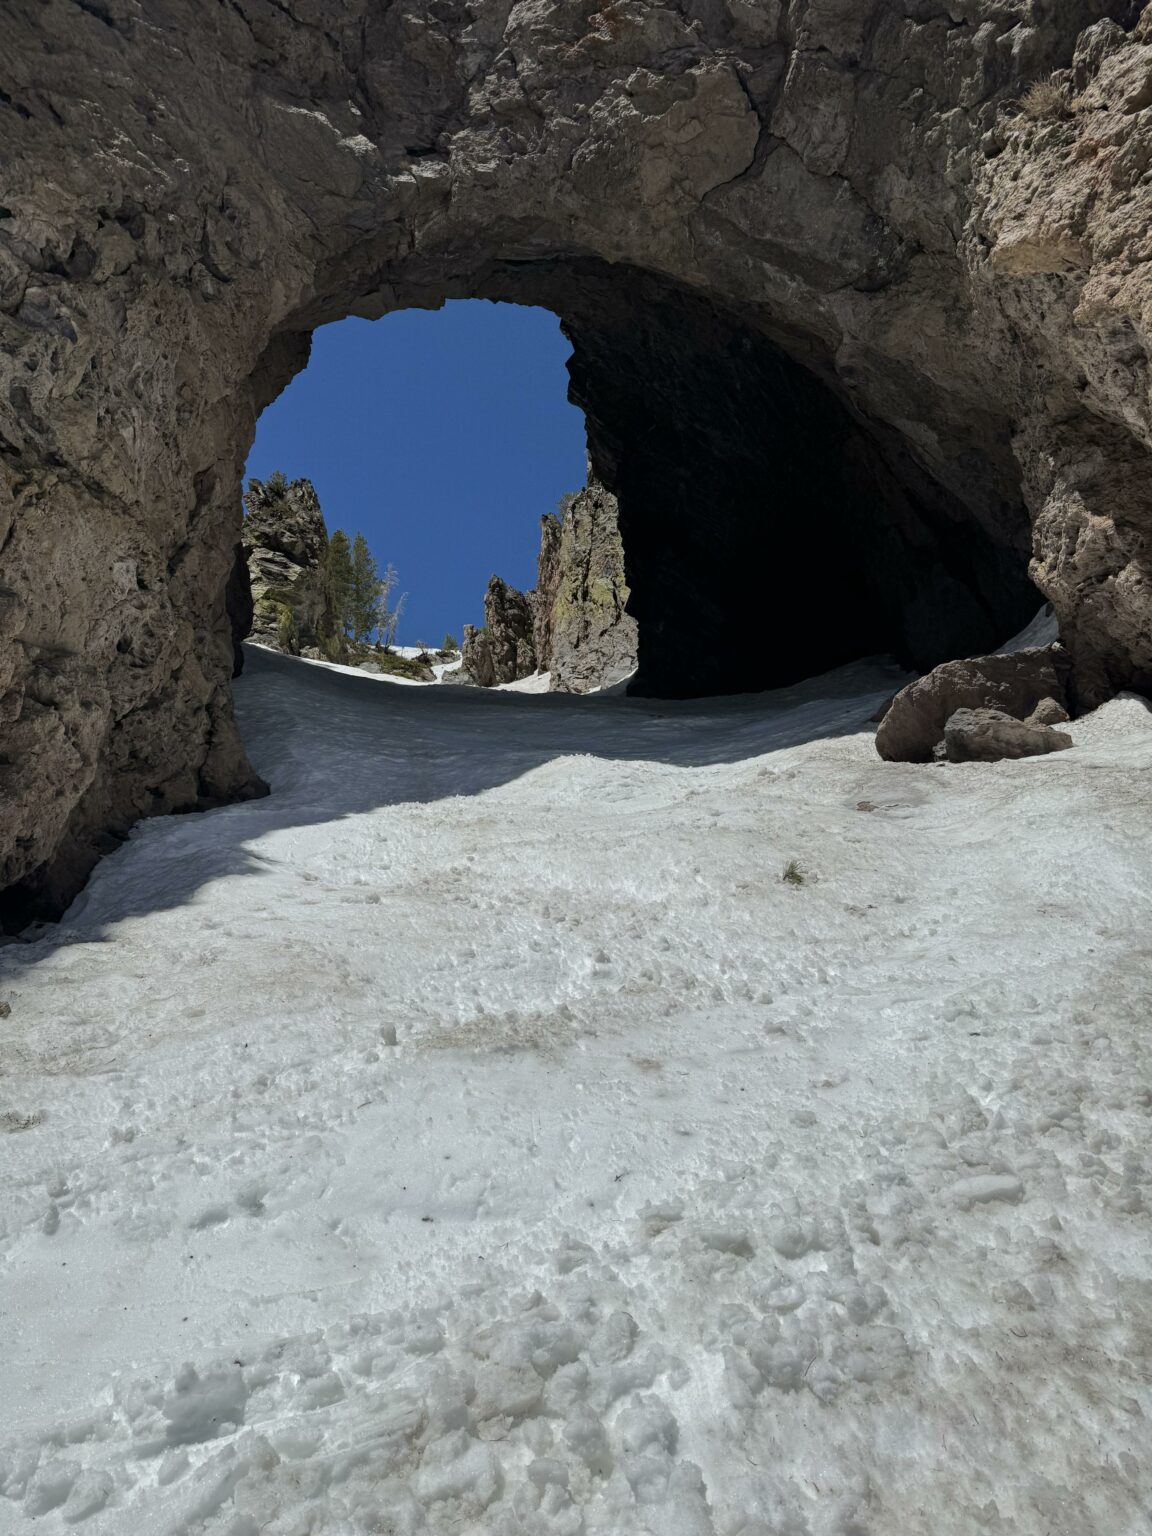 The Exit of Hole in the Wall - Mammoth Lakes Basis